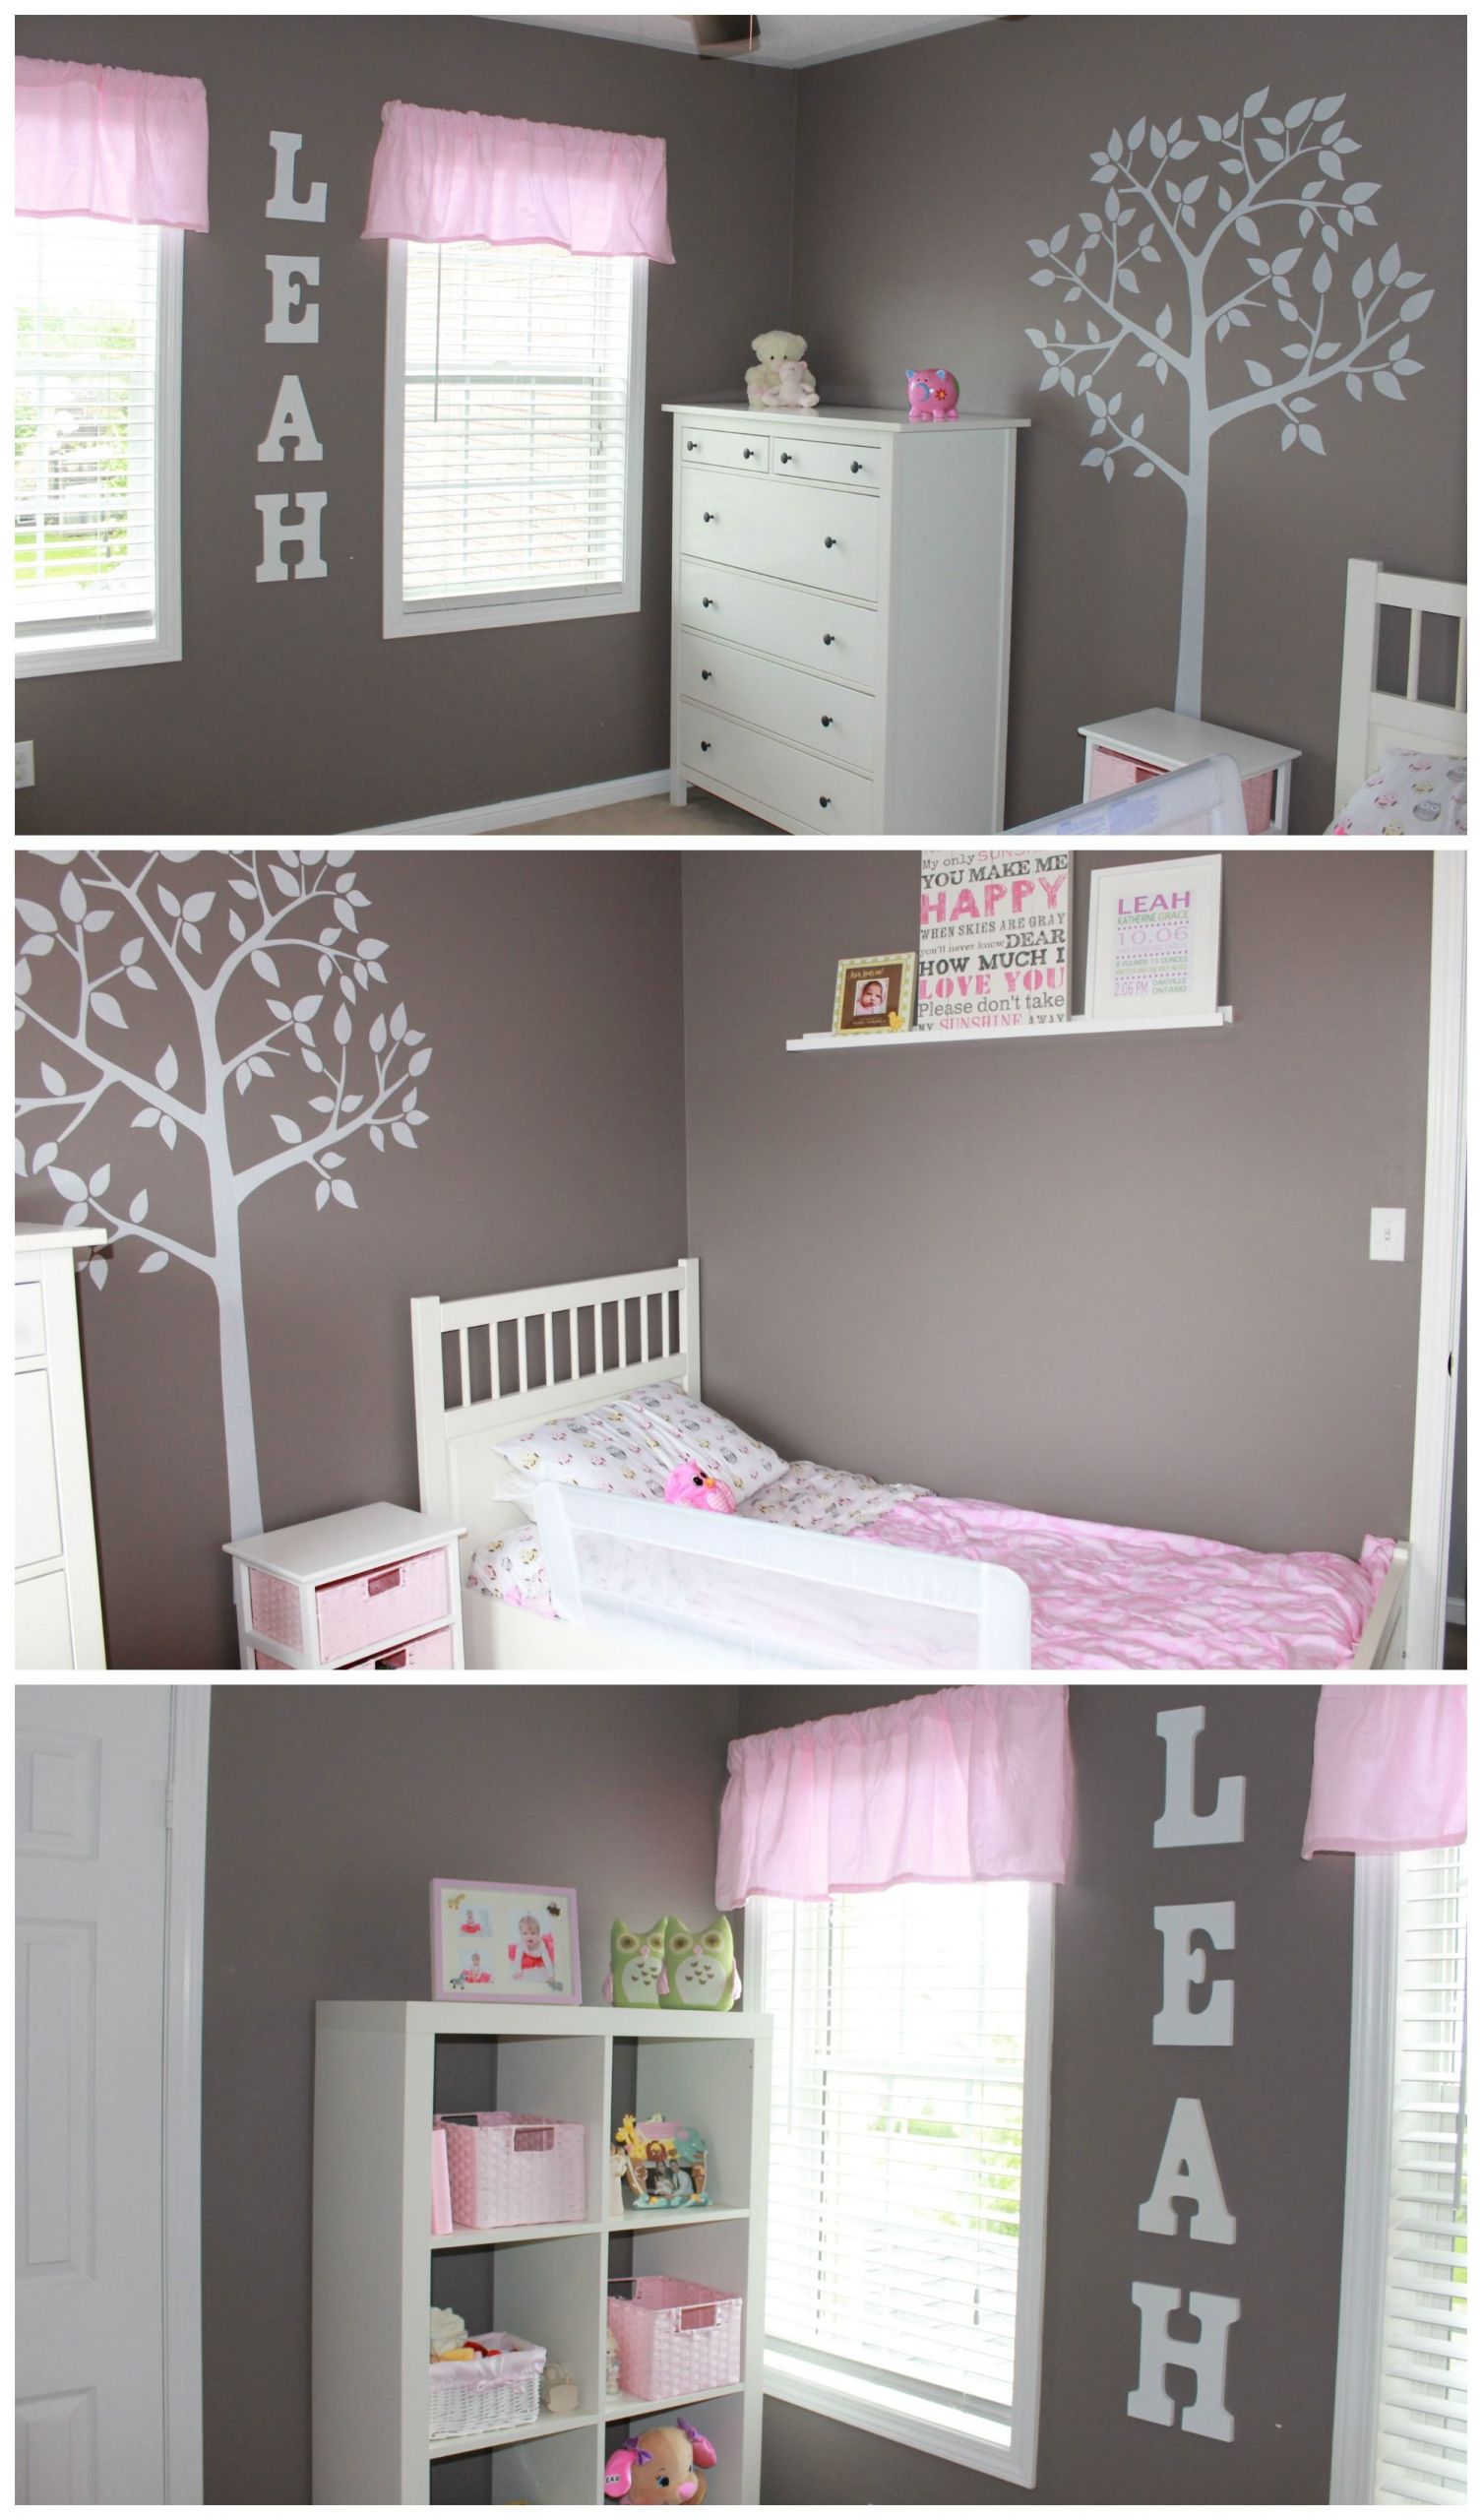 Kids Bedroom Ideas On A Budget
 Simple but sophisticated toddler bedroom on a bud